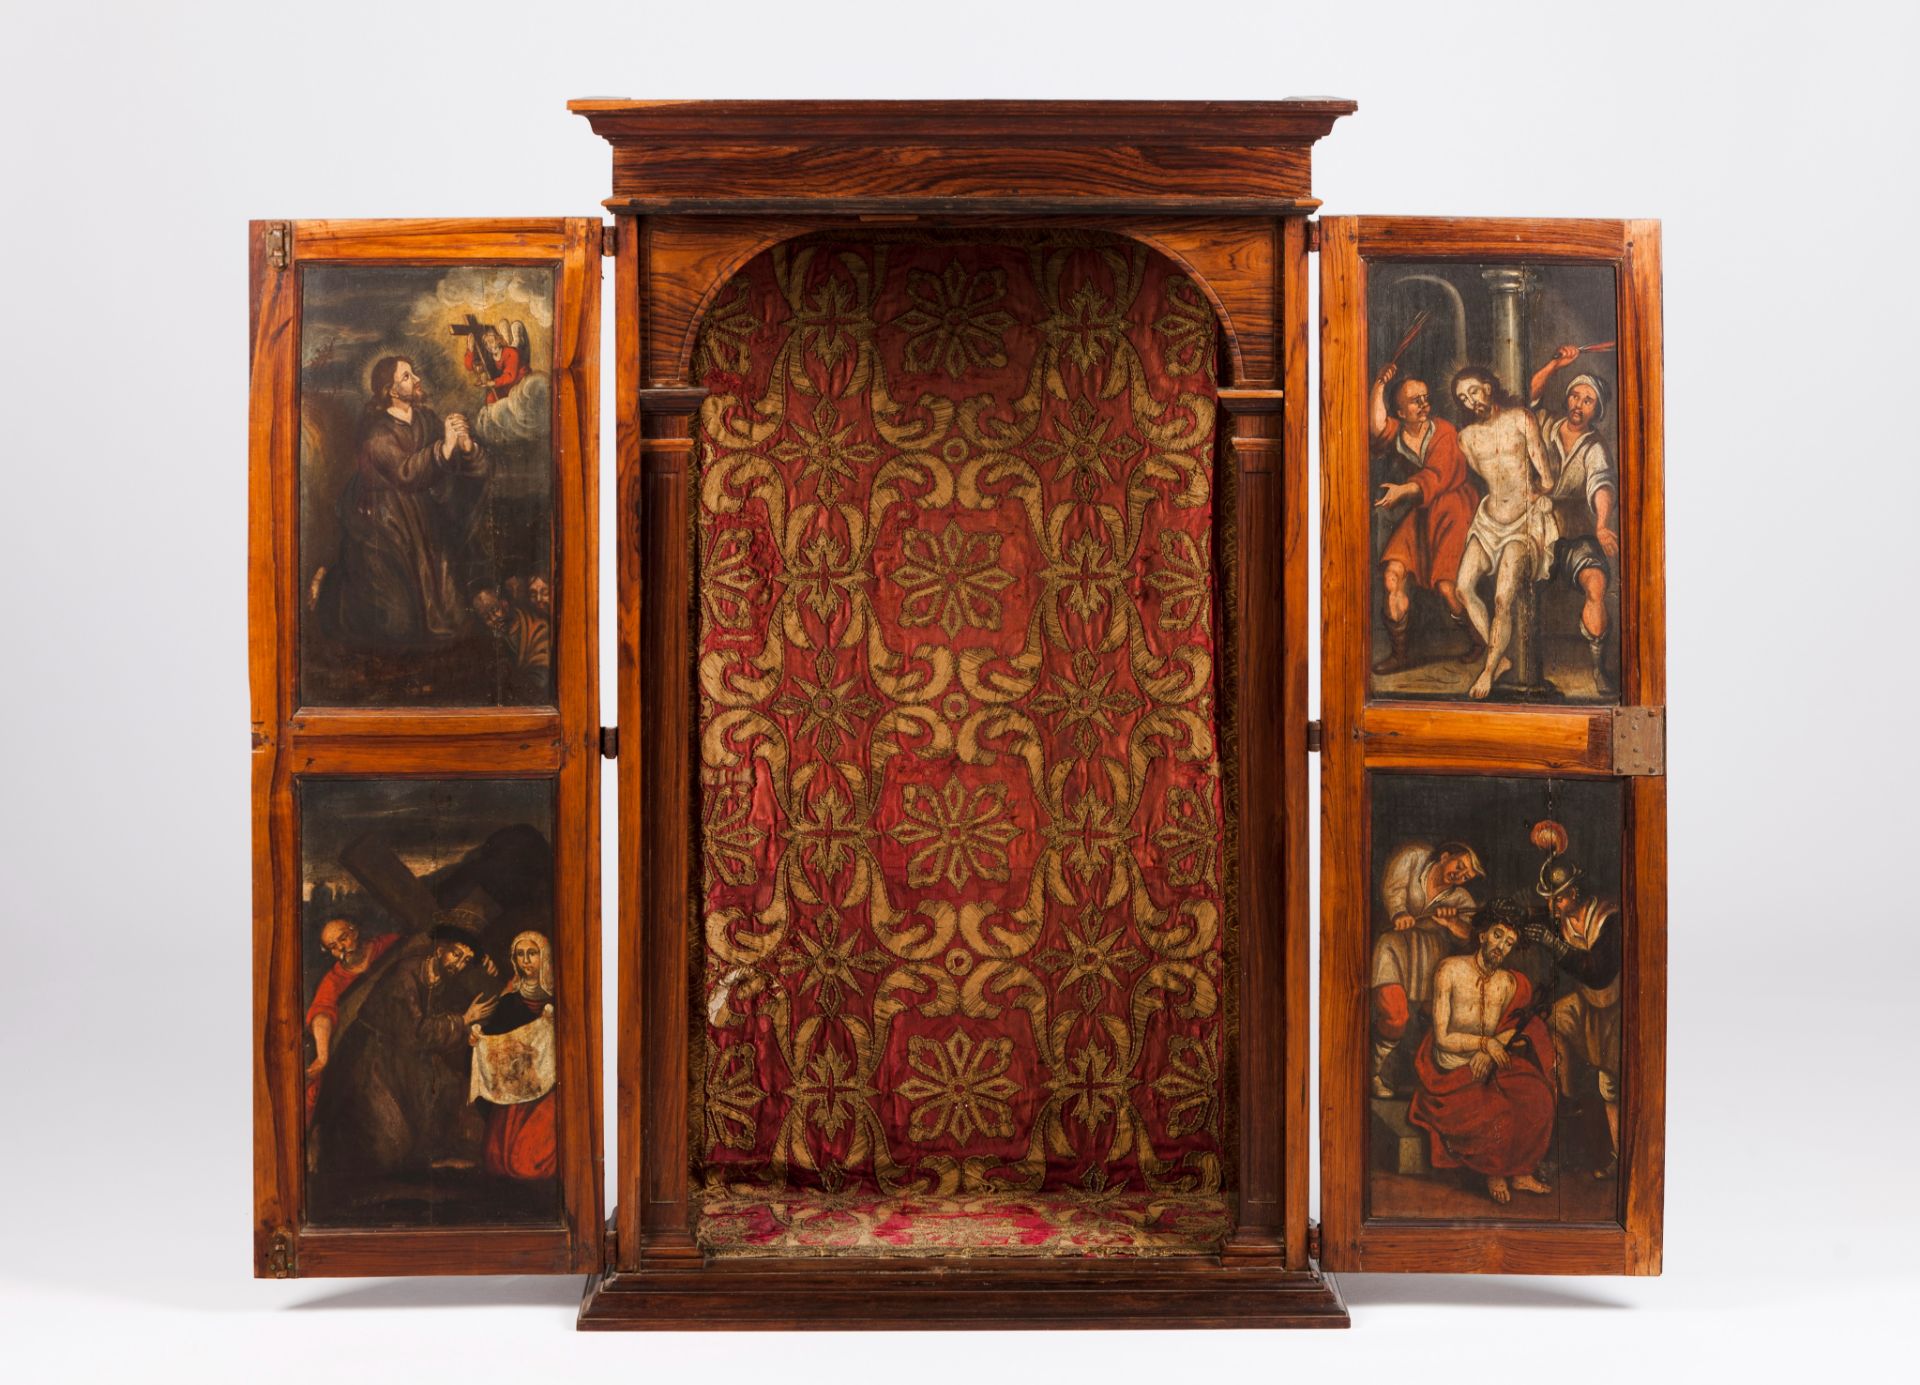 An oratoryRosewood Inner doors painted with scenes of the Passion of Christ Metal thread embroidered